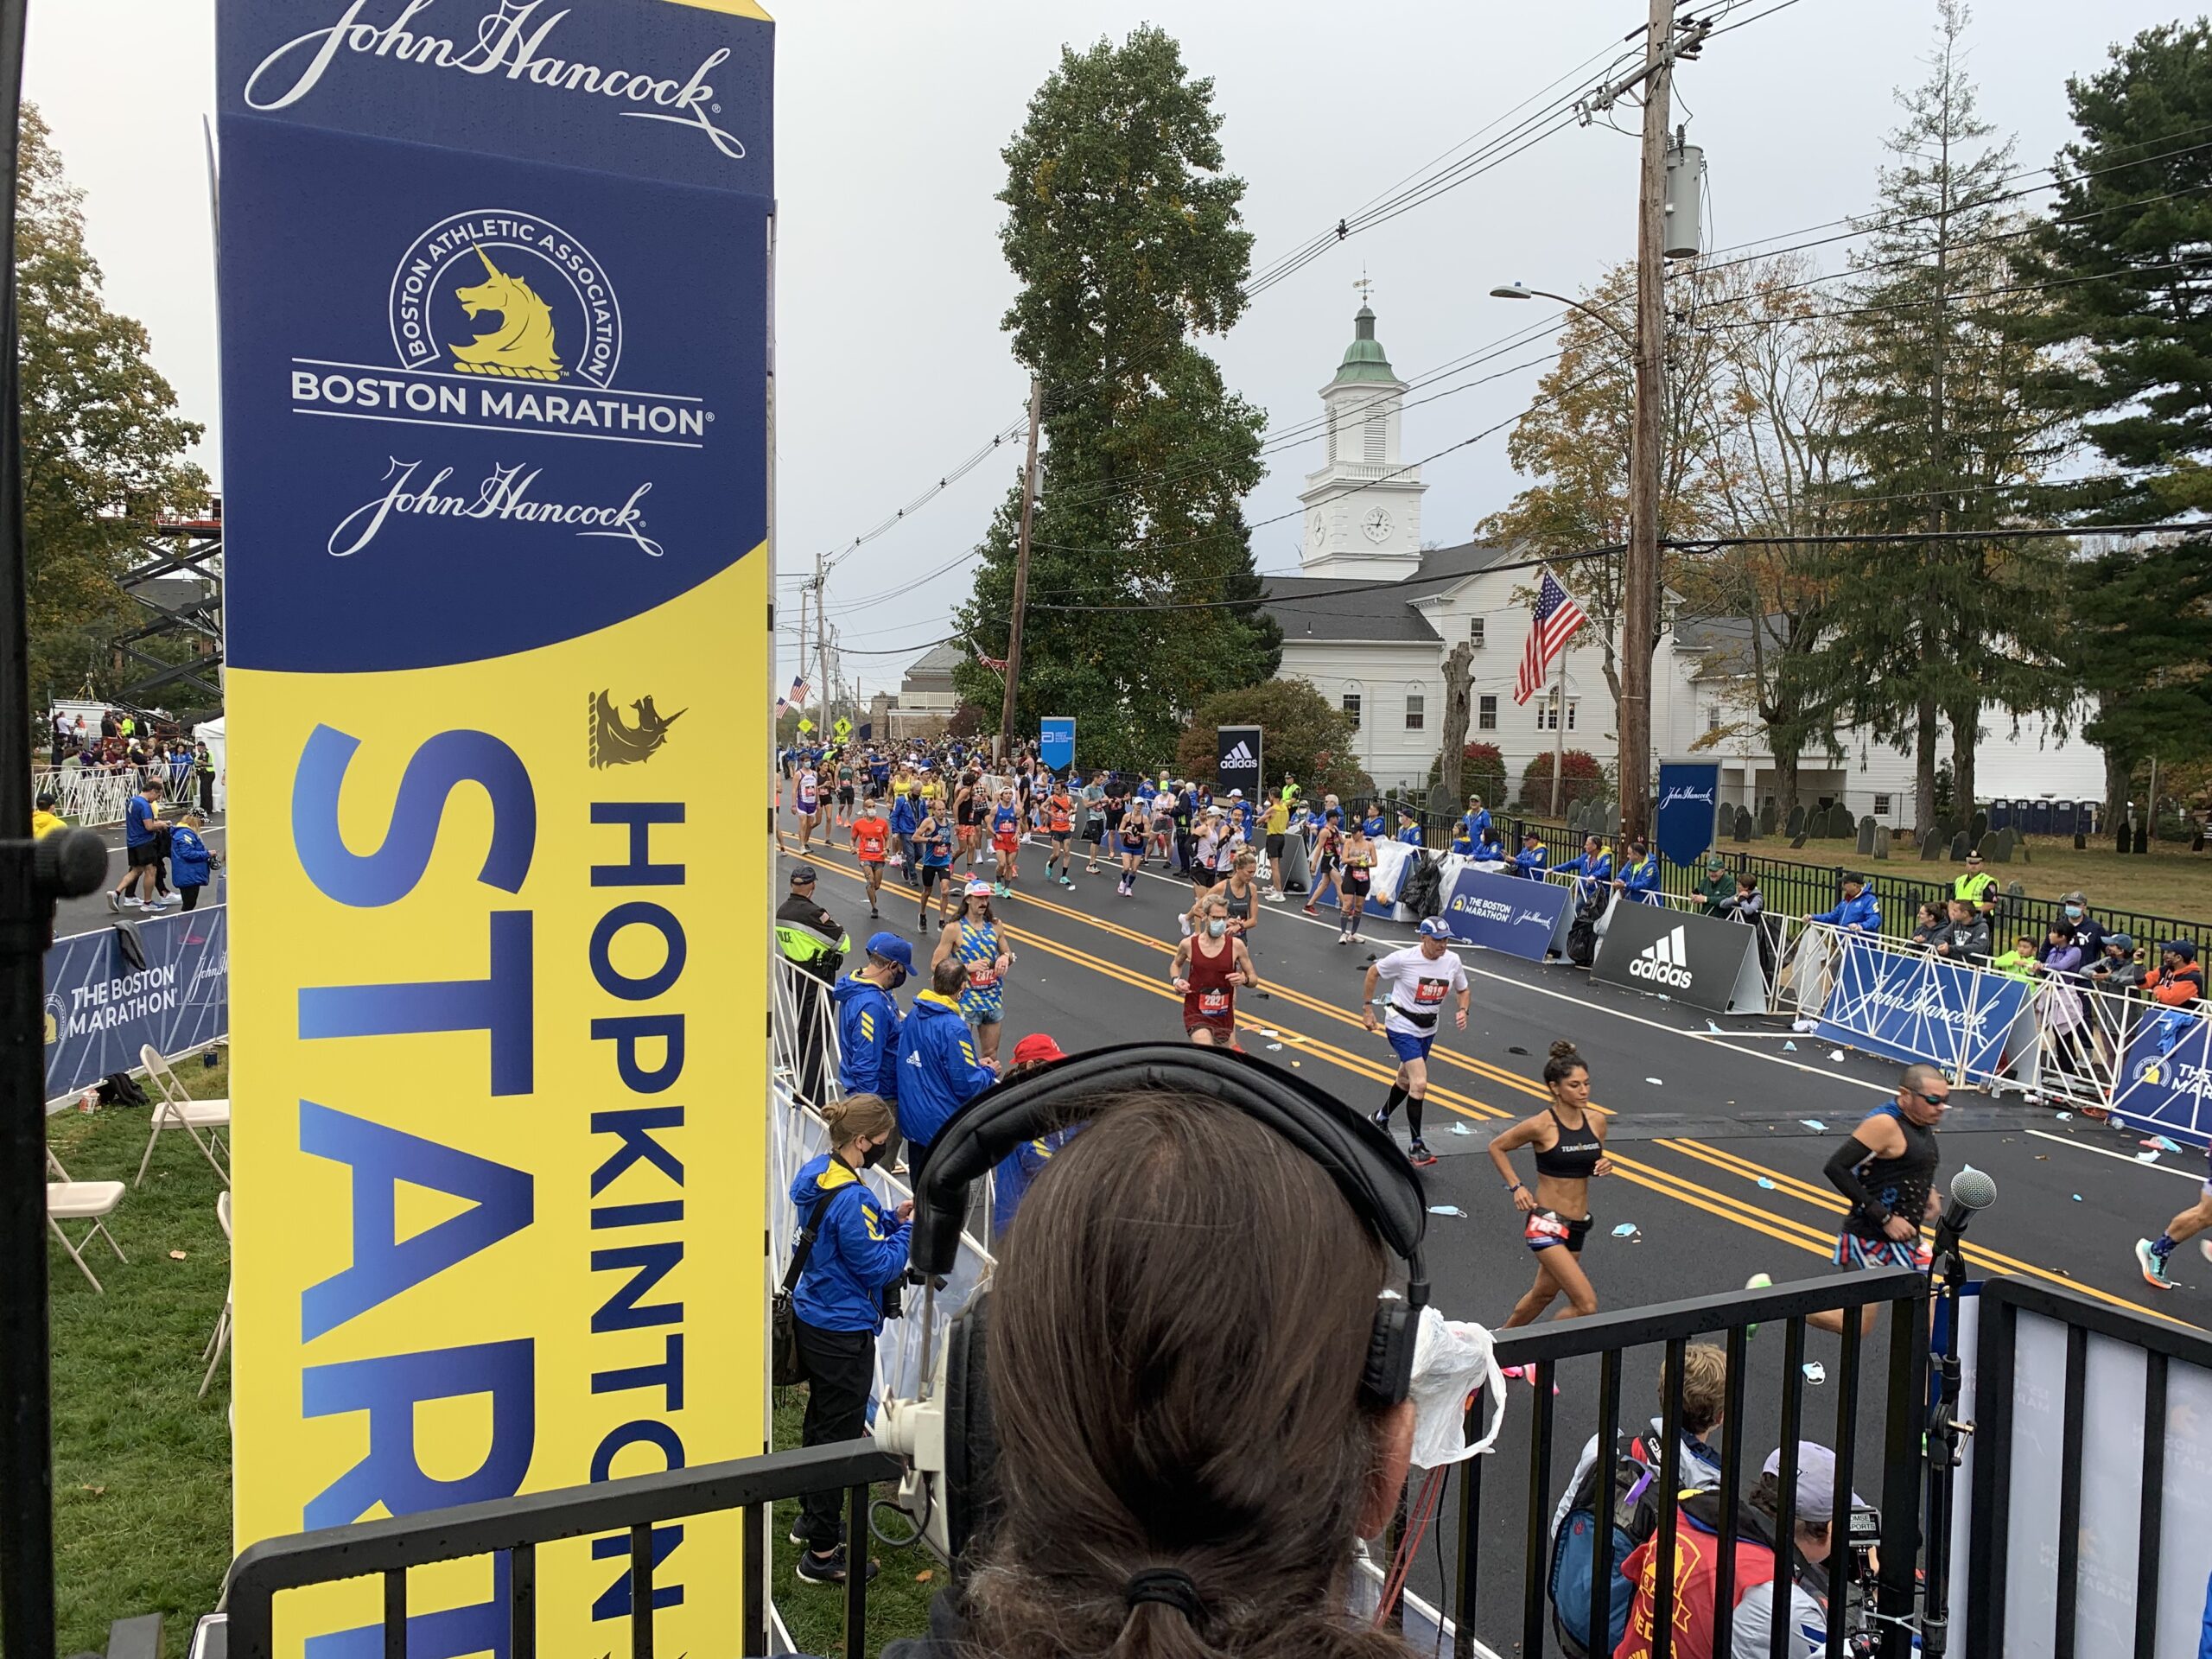 Updated with new deadline of Jan. 18: Town plans random selection for Boston Marathon charity numbers